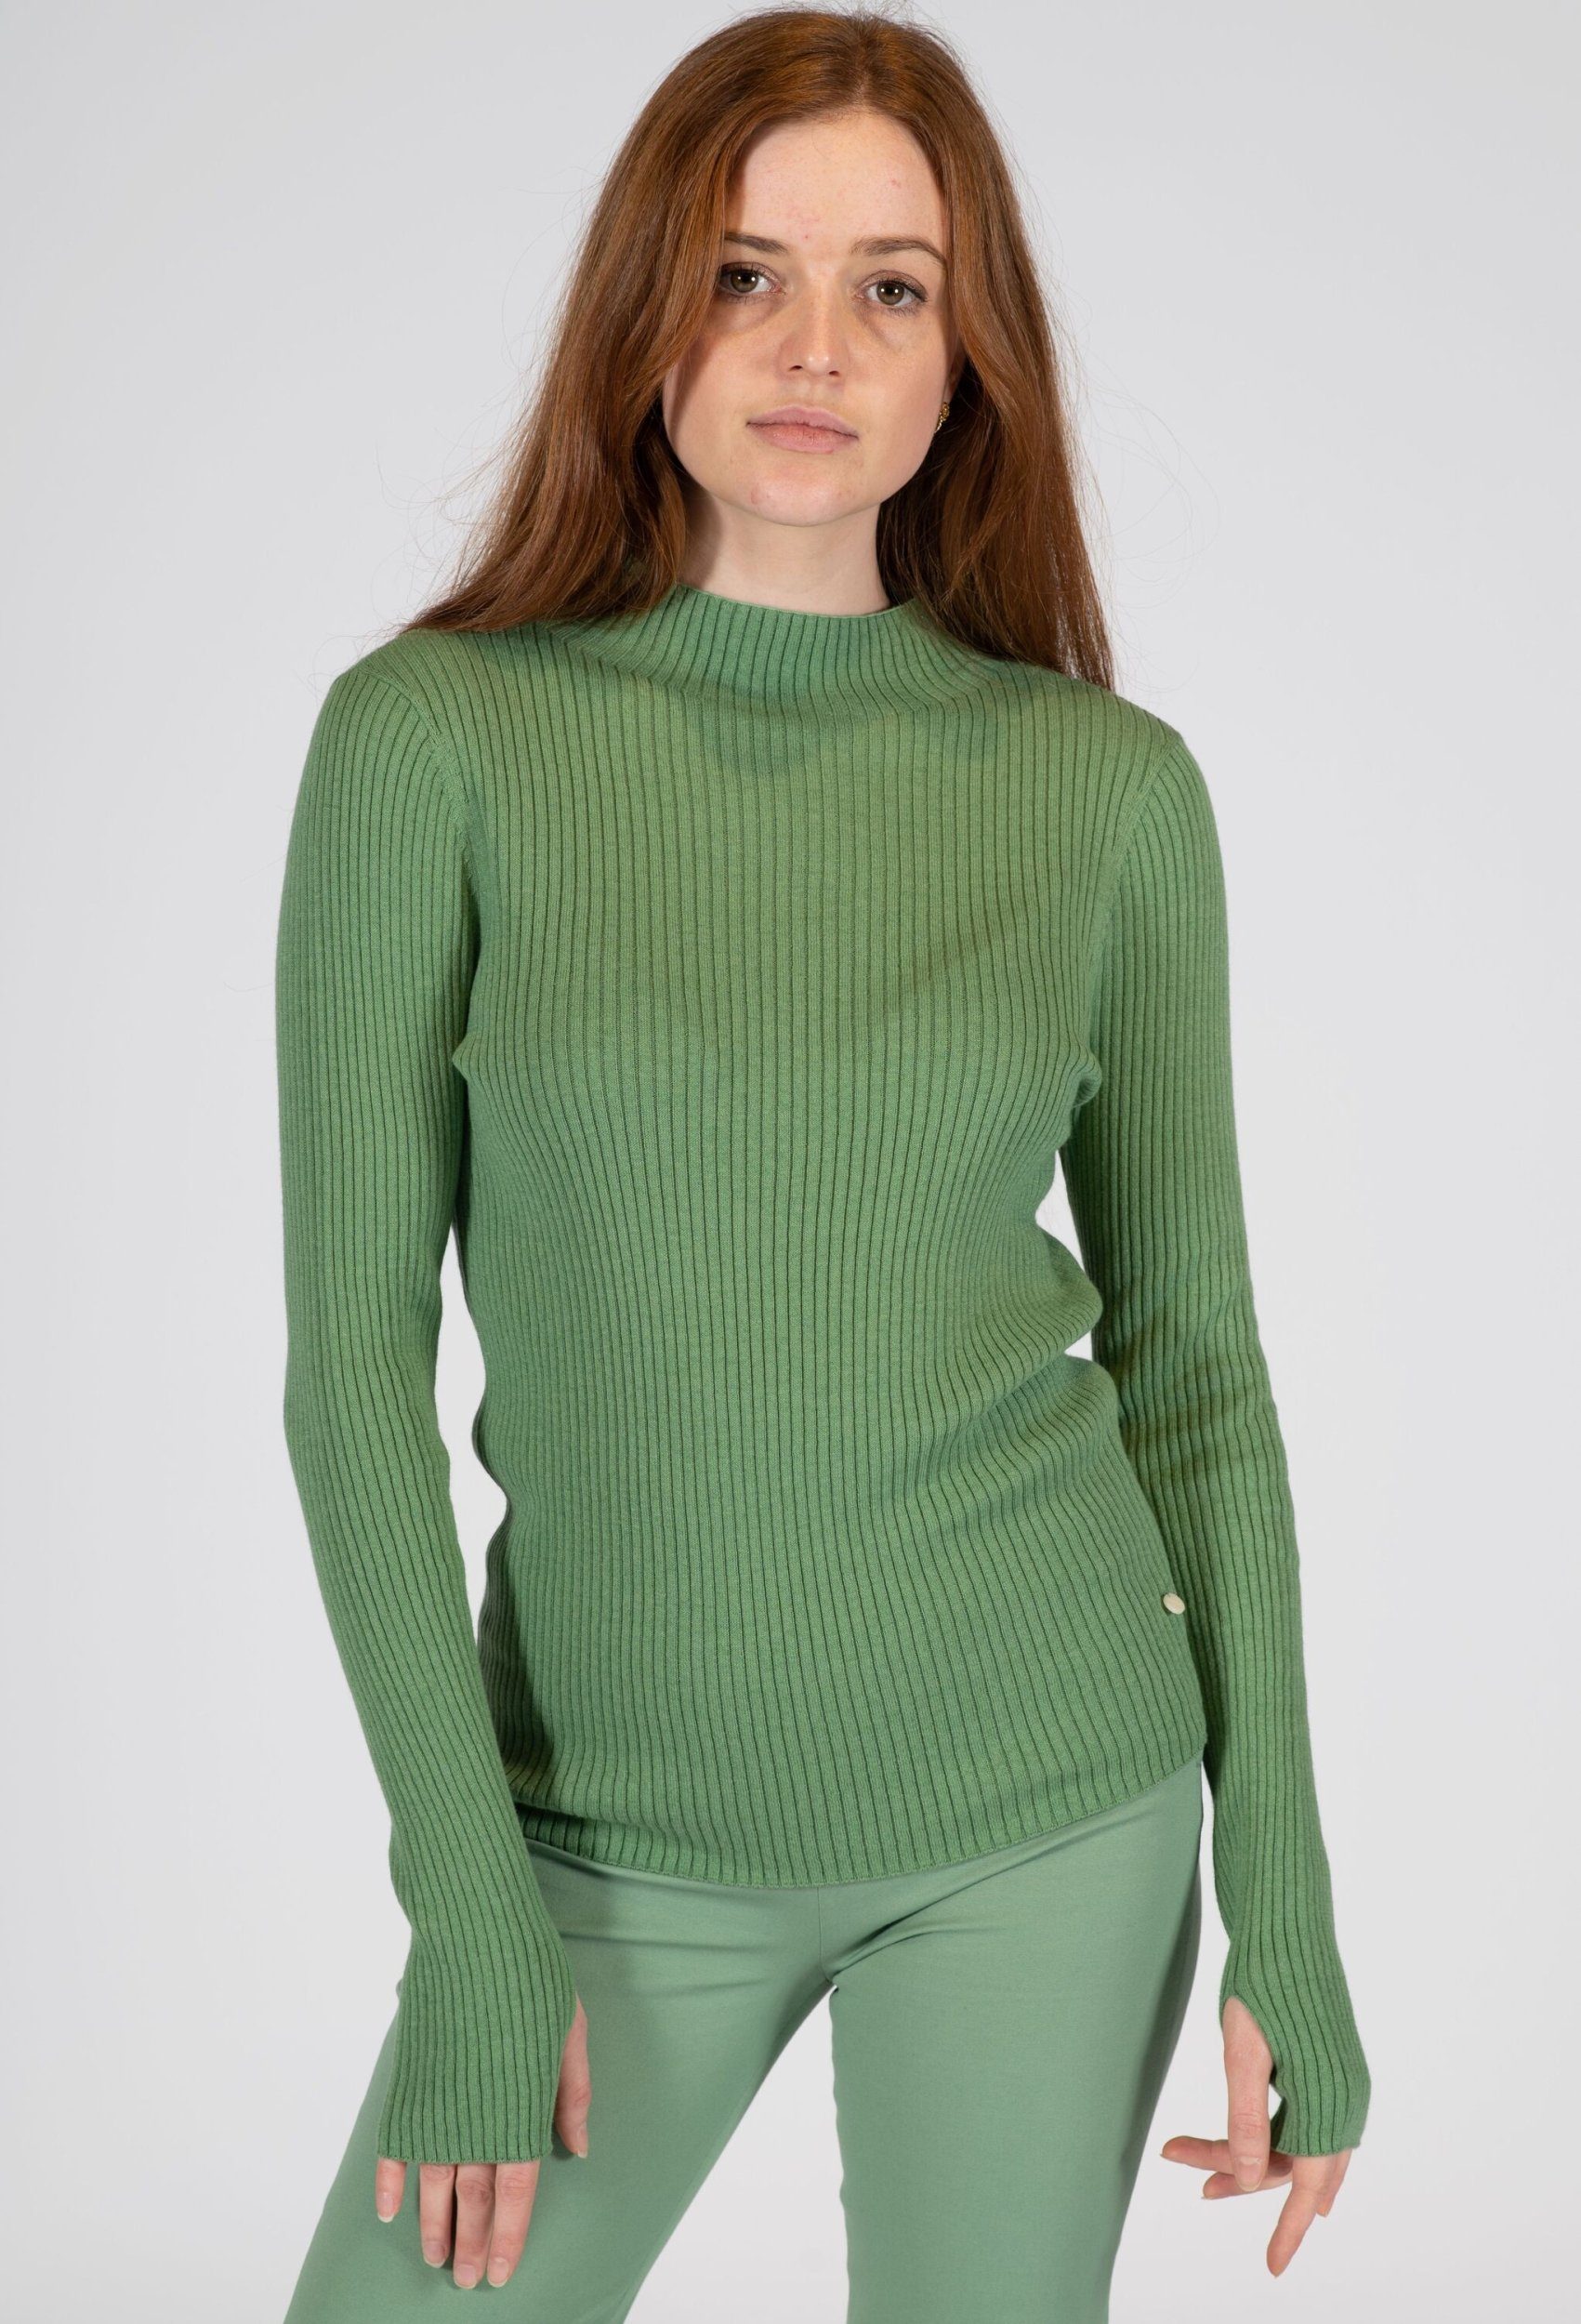 knitted WASABI Rundhalspullover FASHION PEOPLE Turtleneck, THE Basic